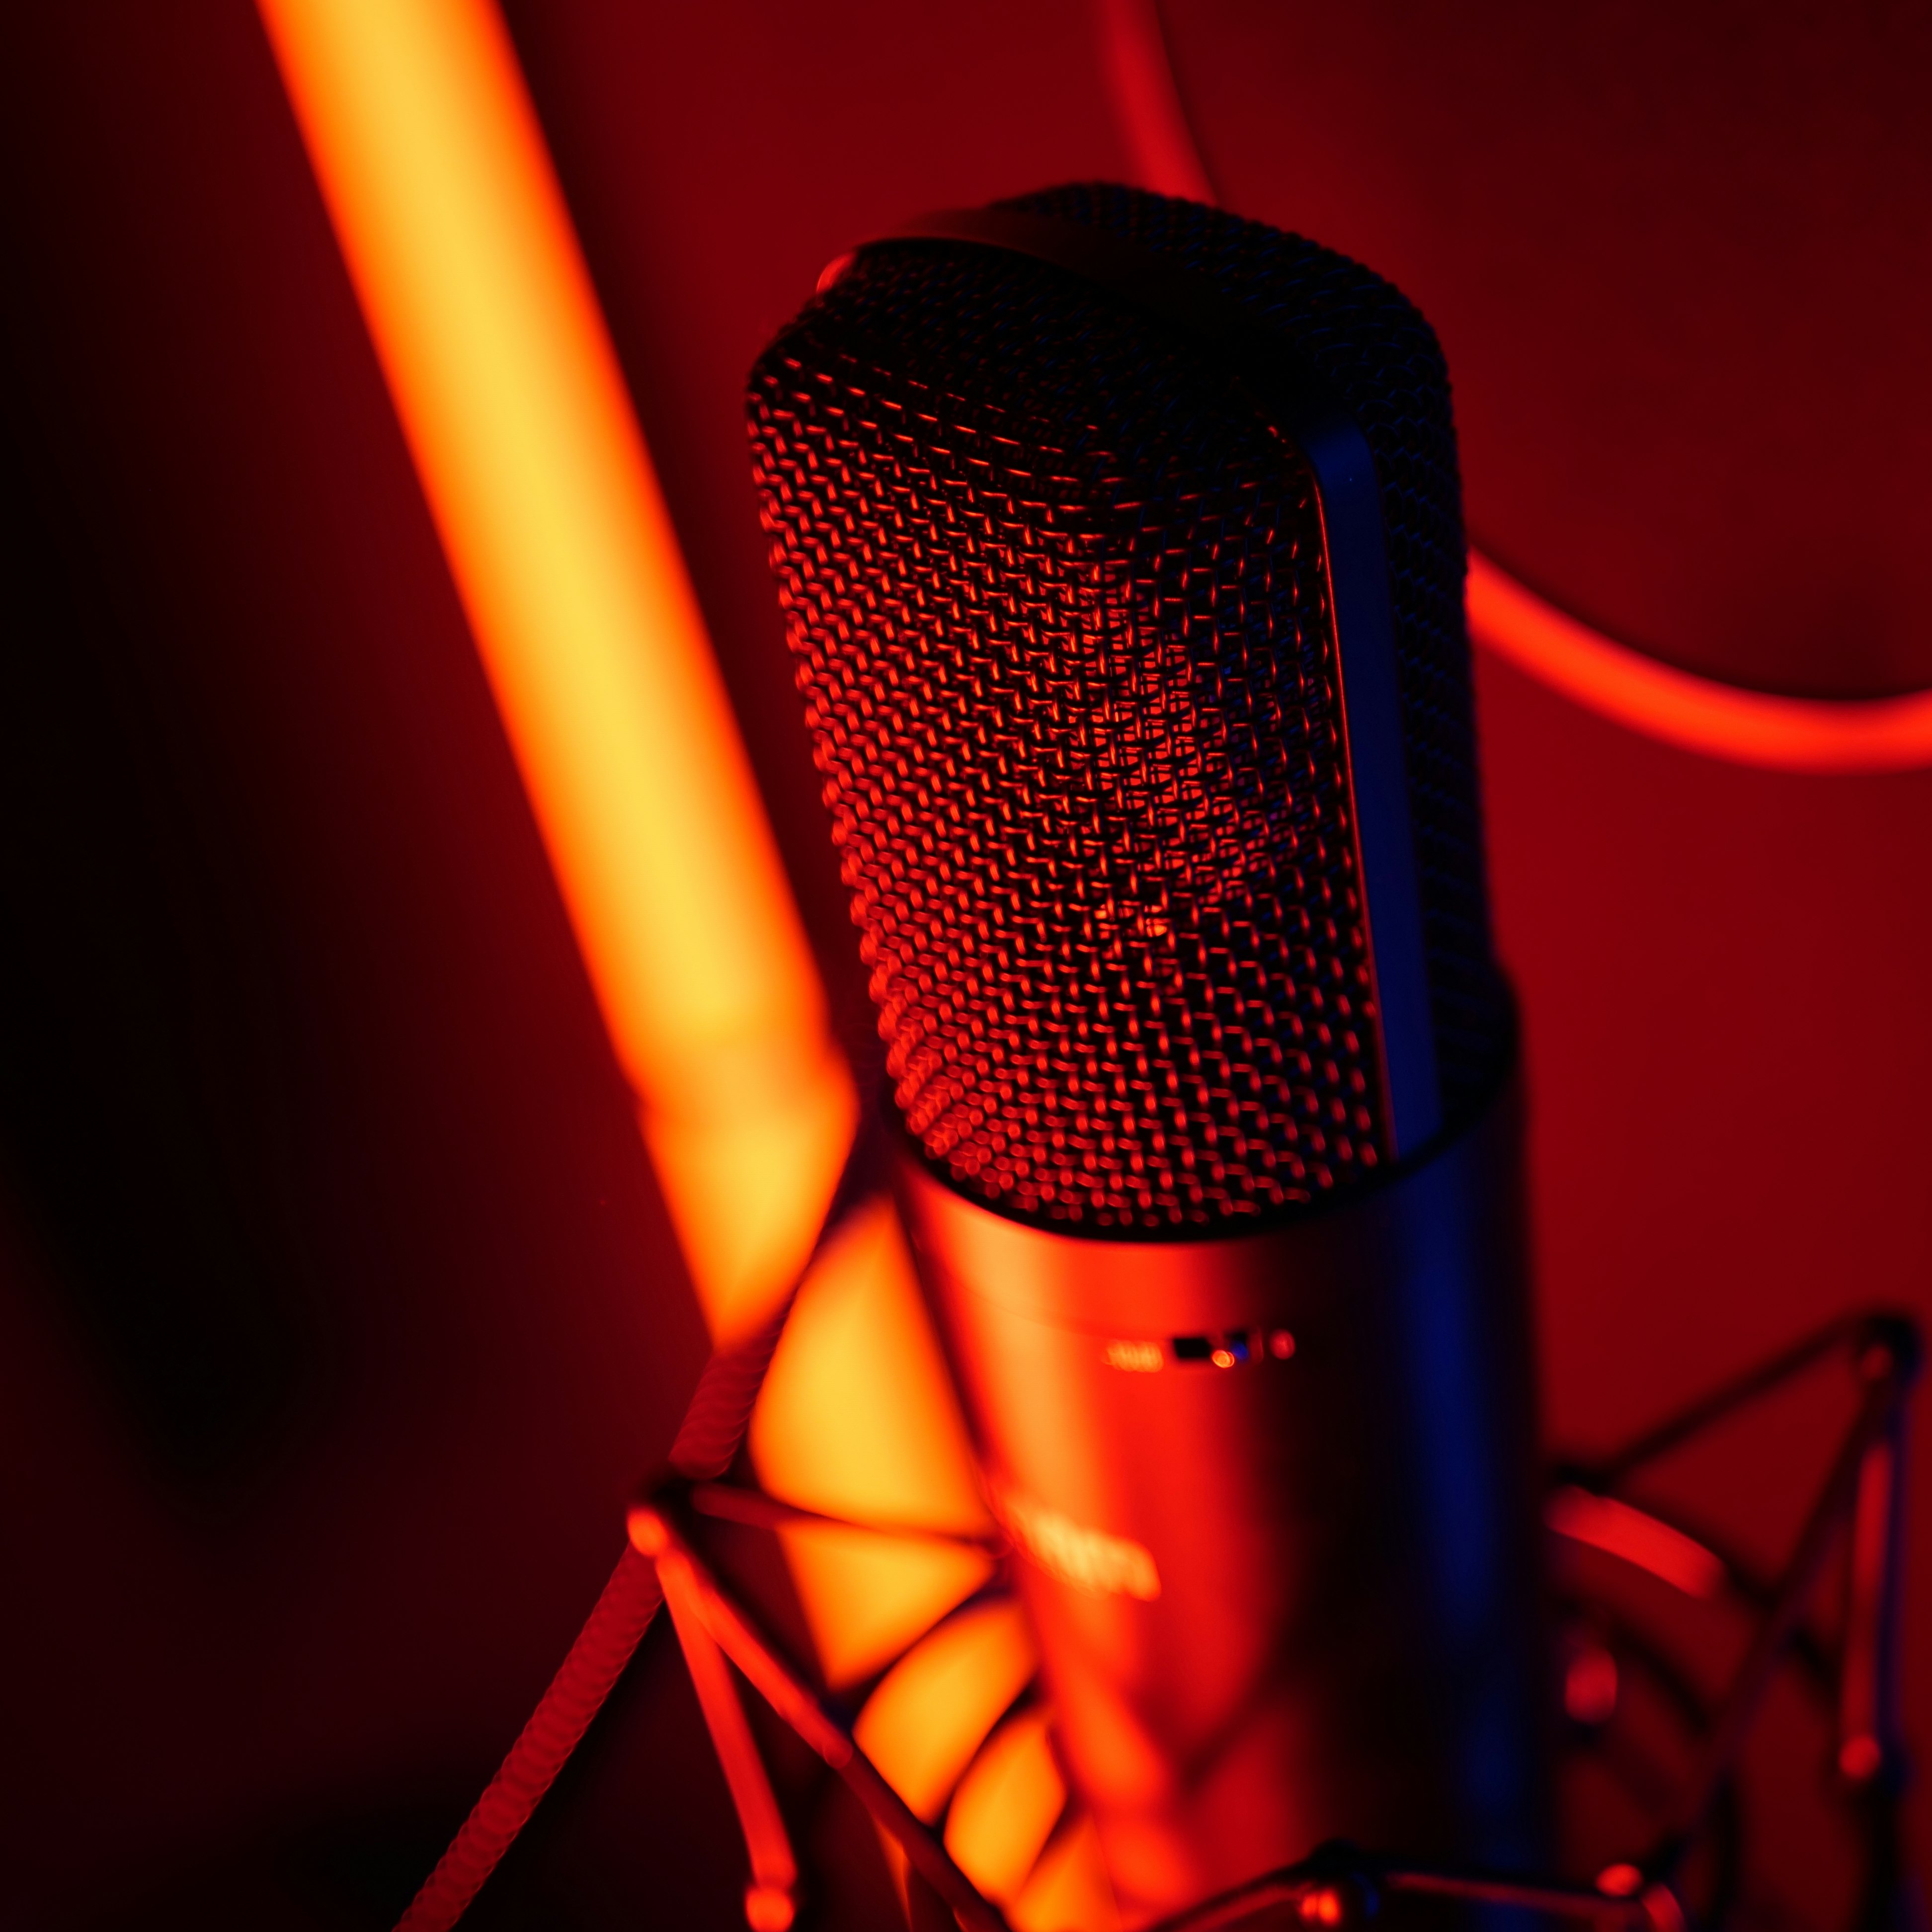 View of a microphone in the booth of a recording studio with red neon light.